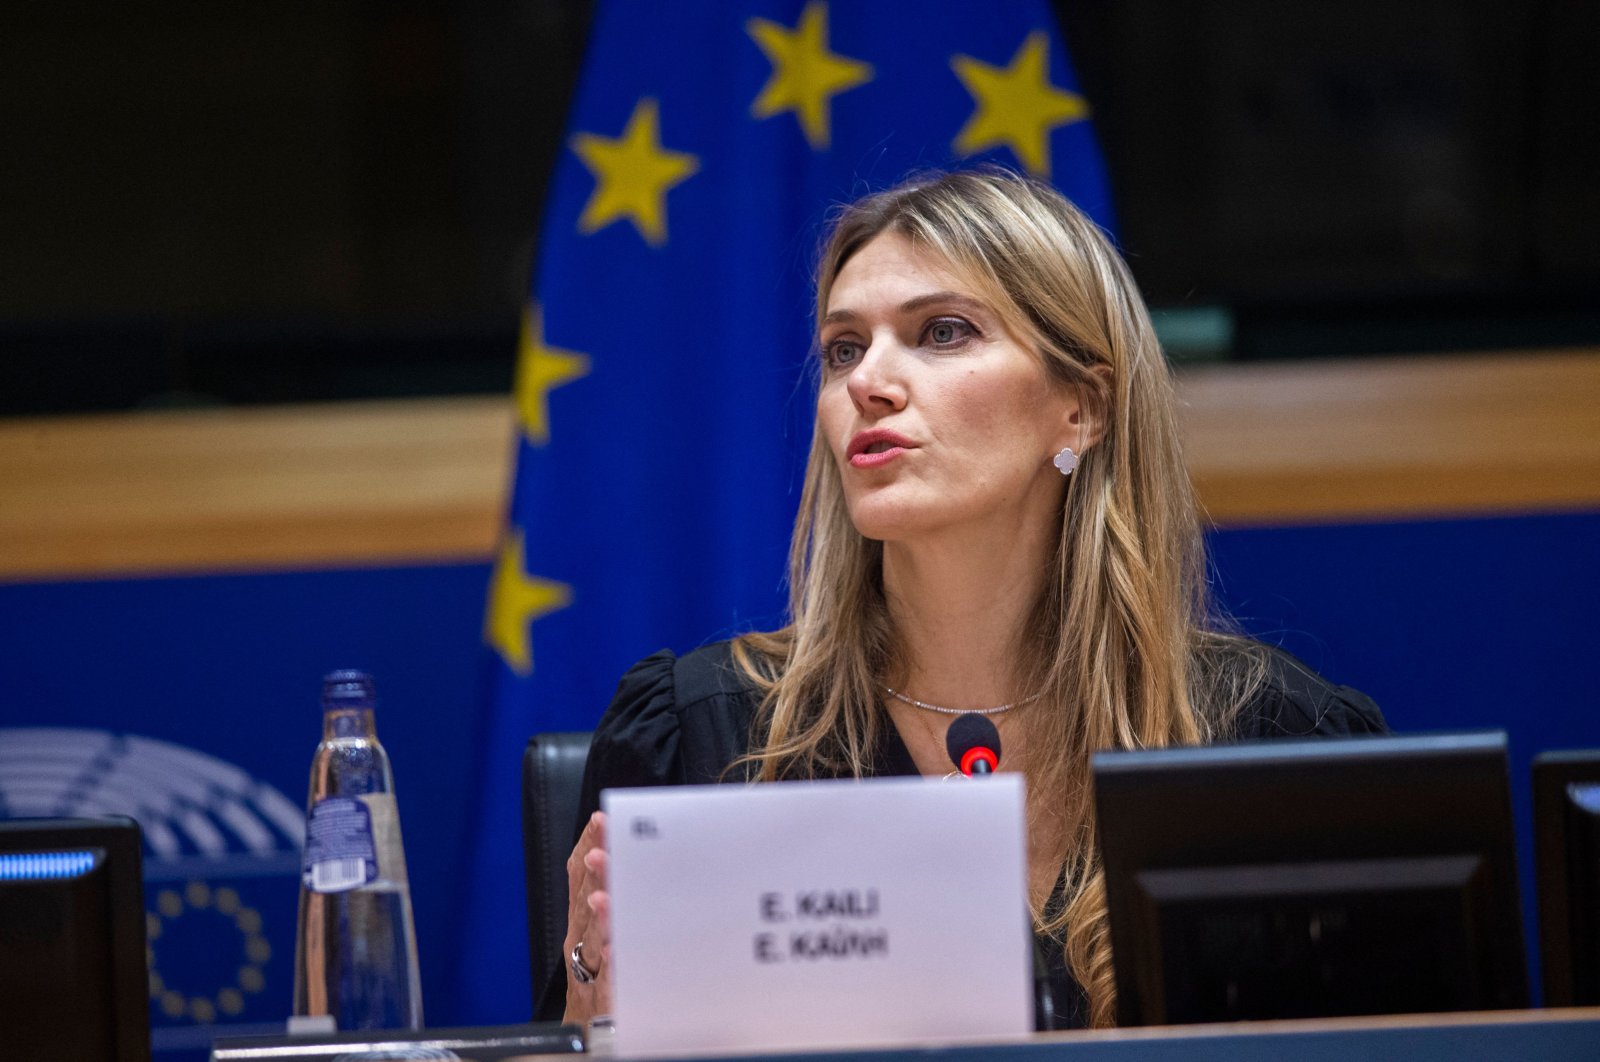 Greek politician and European Parliament Vice President Eva Kaili at an event in Brussels, Belgium, Dec. 7, 2022. (AFP Photo)